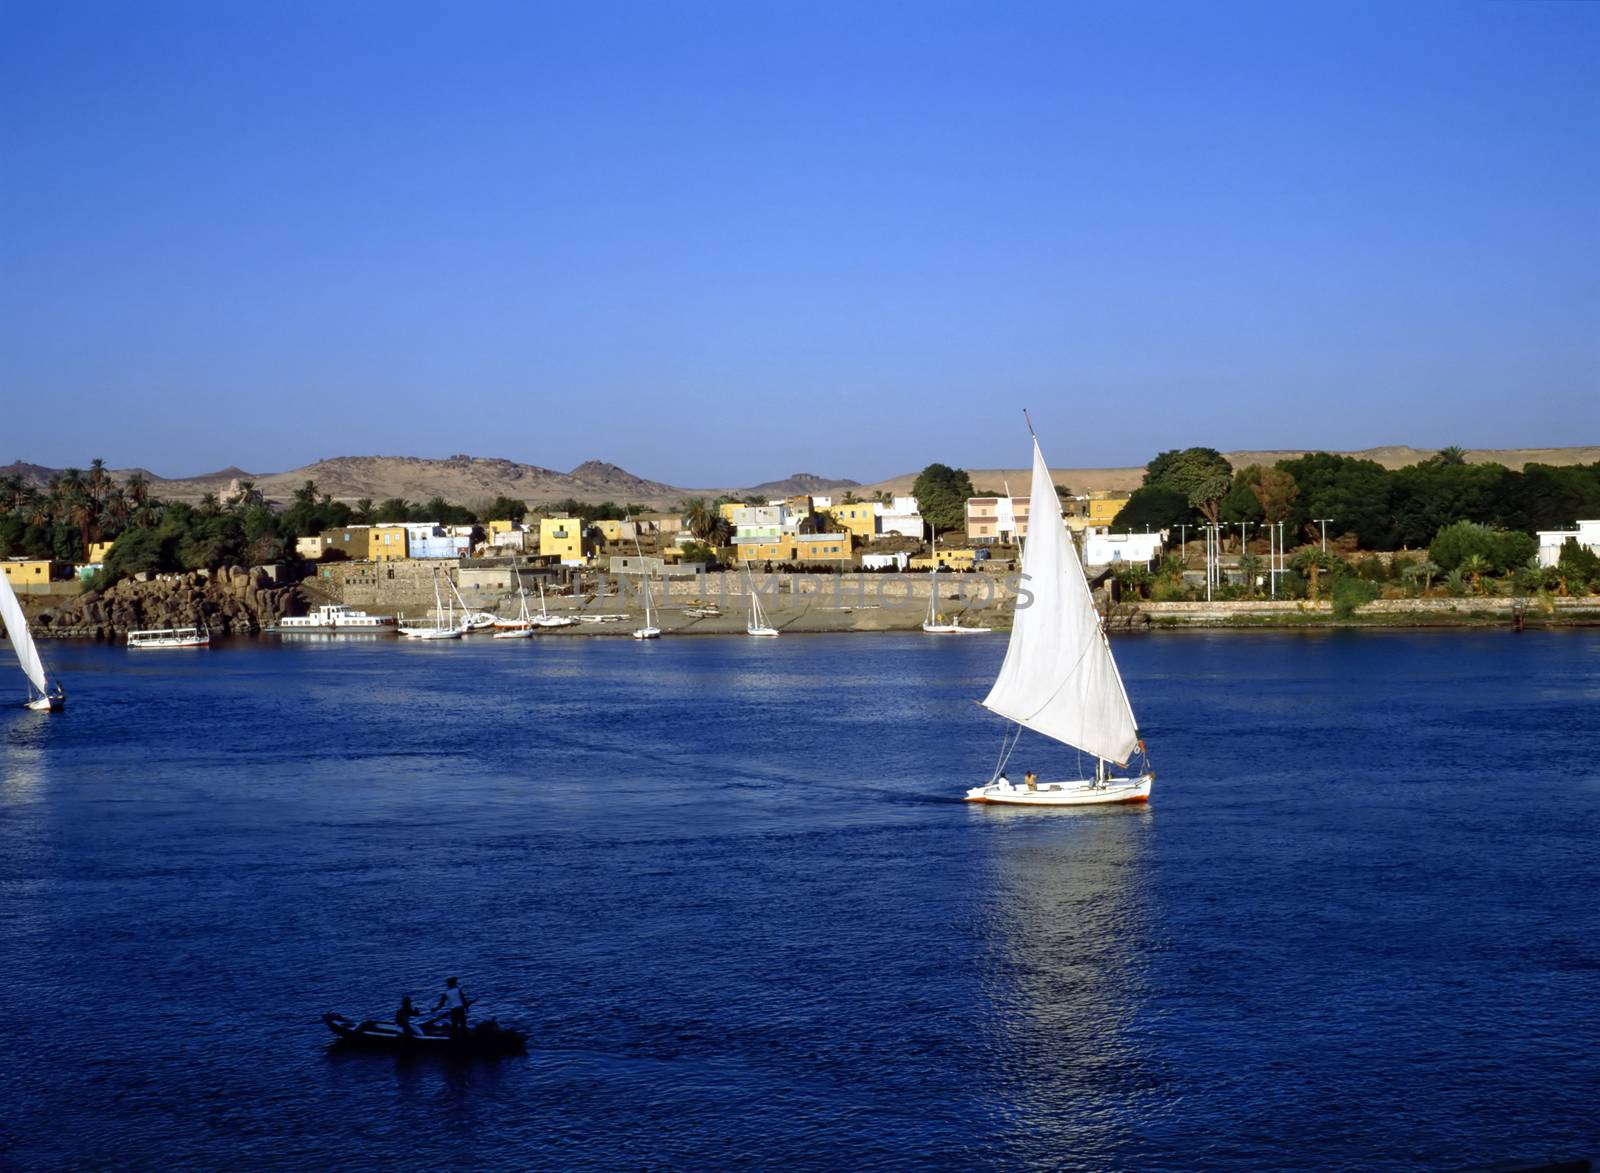 Feluccas on Nile by Asuan, Egypt by jol66